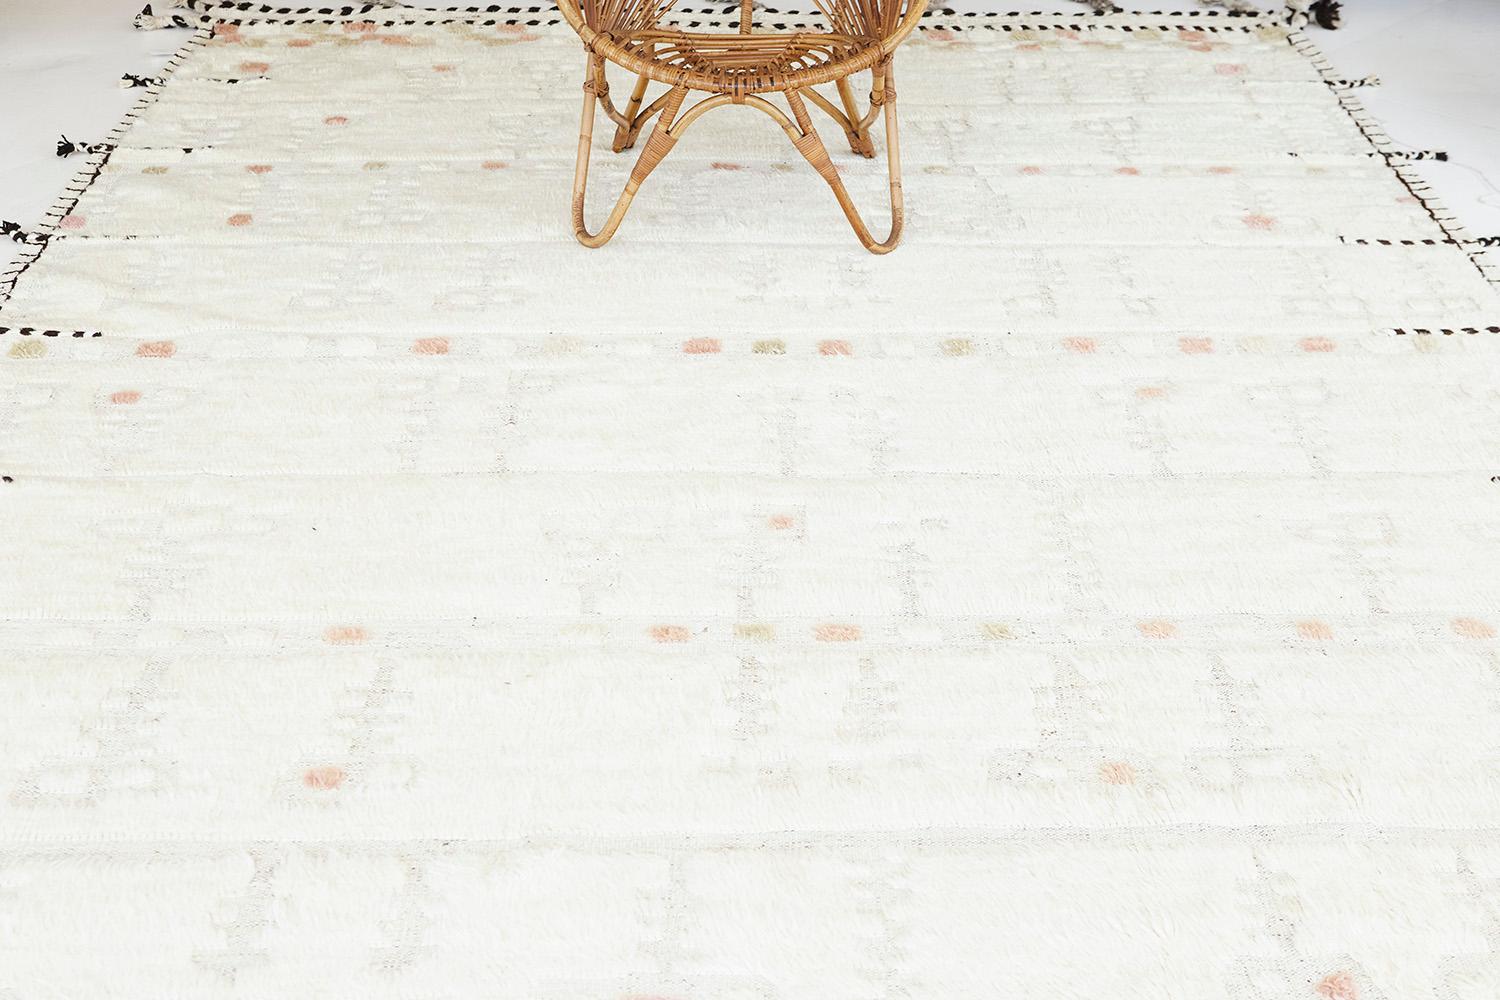 Falt' features a sense of comfortability and coziness. This wonderful rug boasts its natural colour scheme with a hint of vibrant checkered accent patterns. Kust also means 'coast' that was consciously designed and attentively woven for a serene